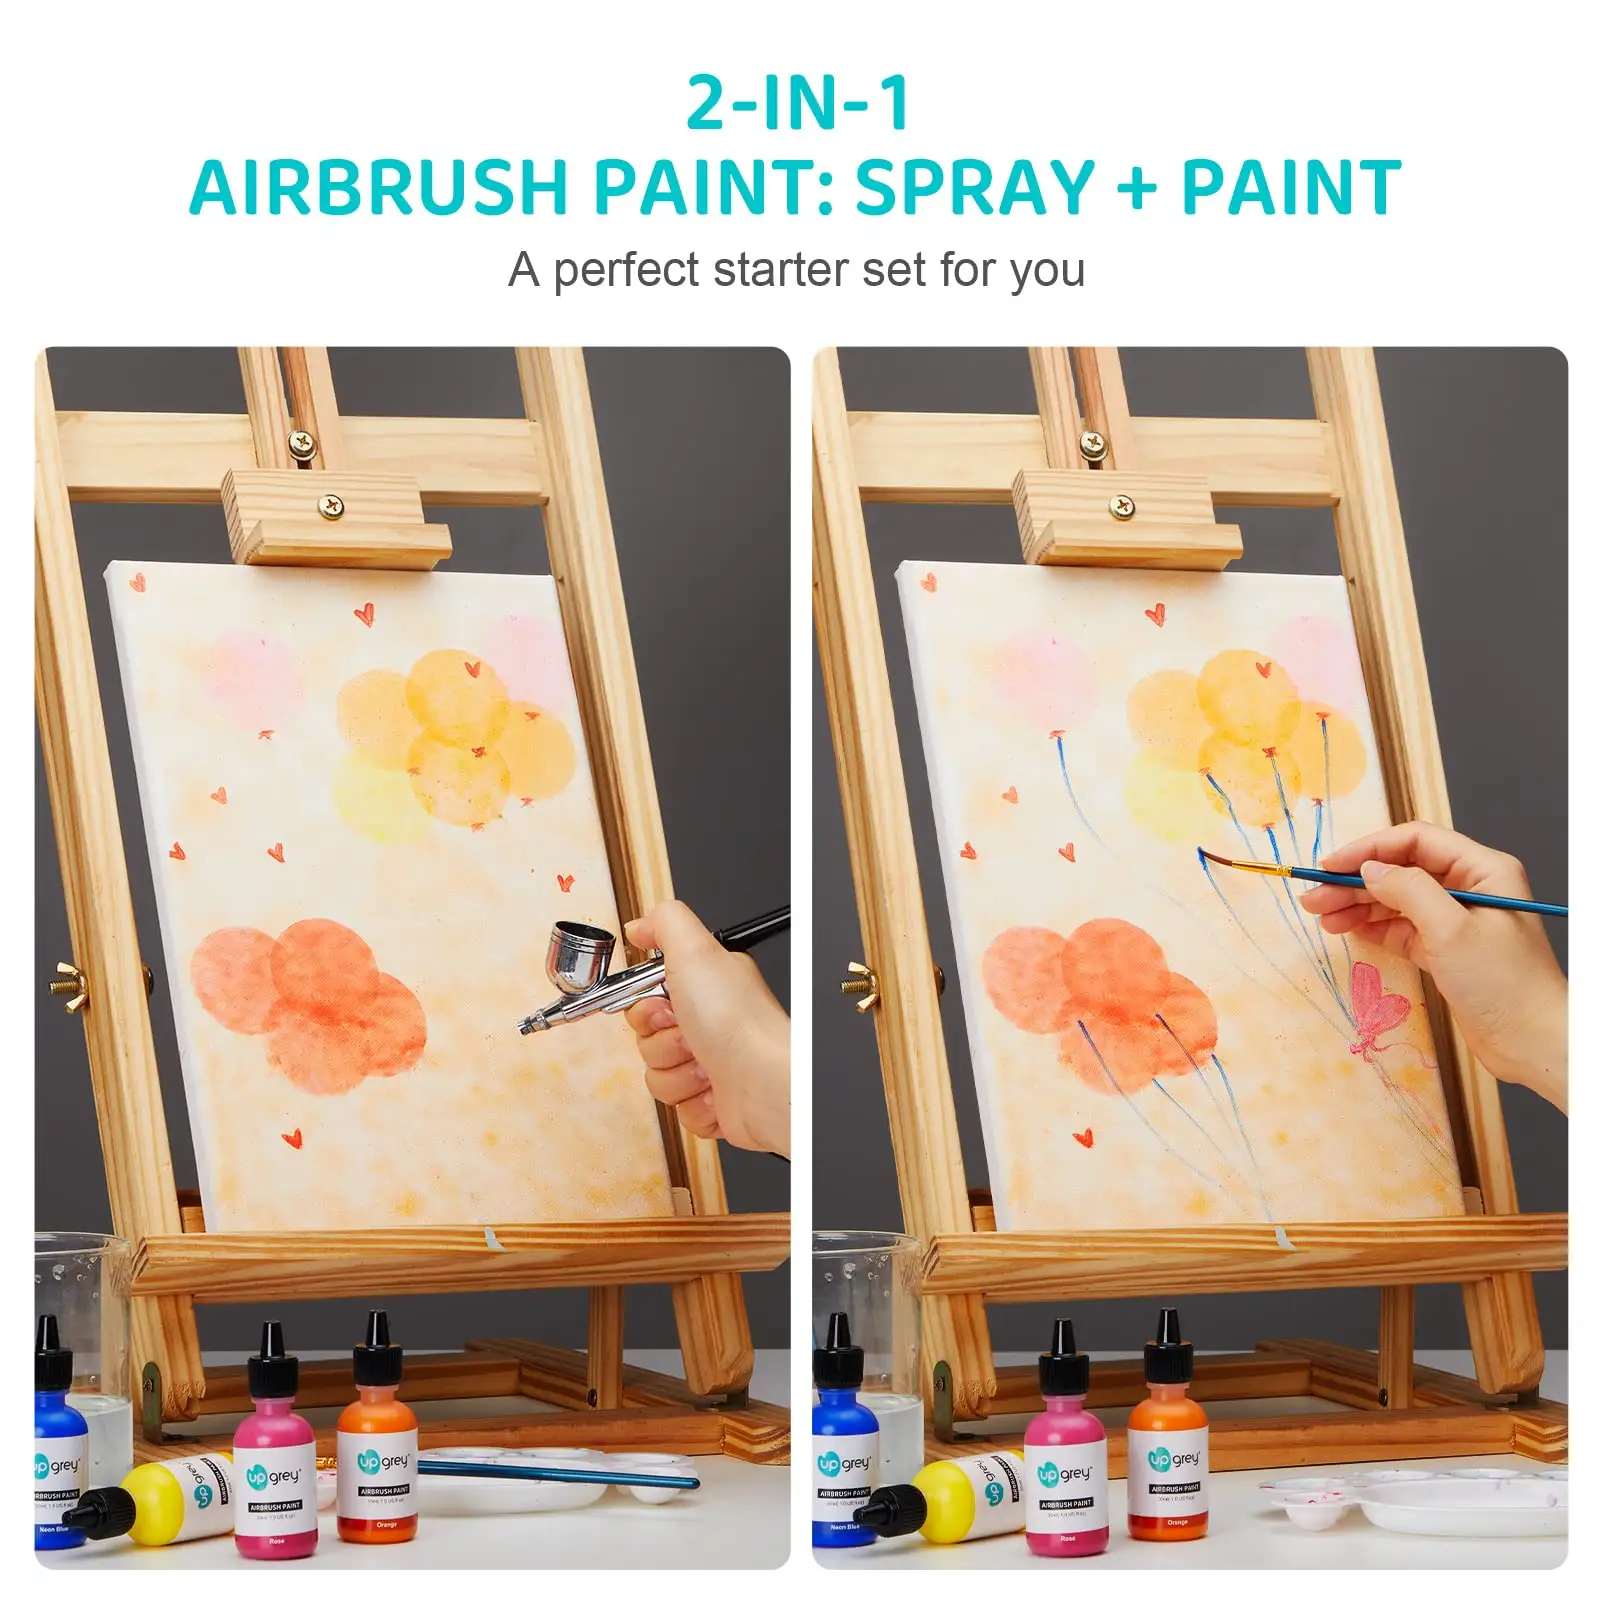 DIY Painting Customize Logo 24 Colors Non Toxic Water-based Acrylic Spray Paint For Airbrush Gun Painting